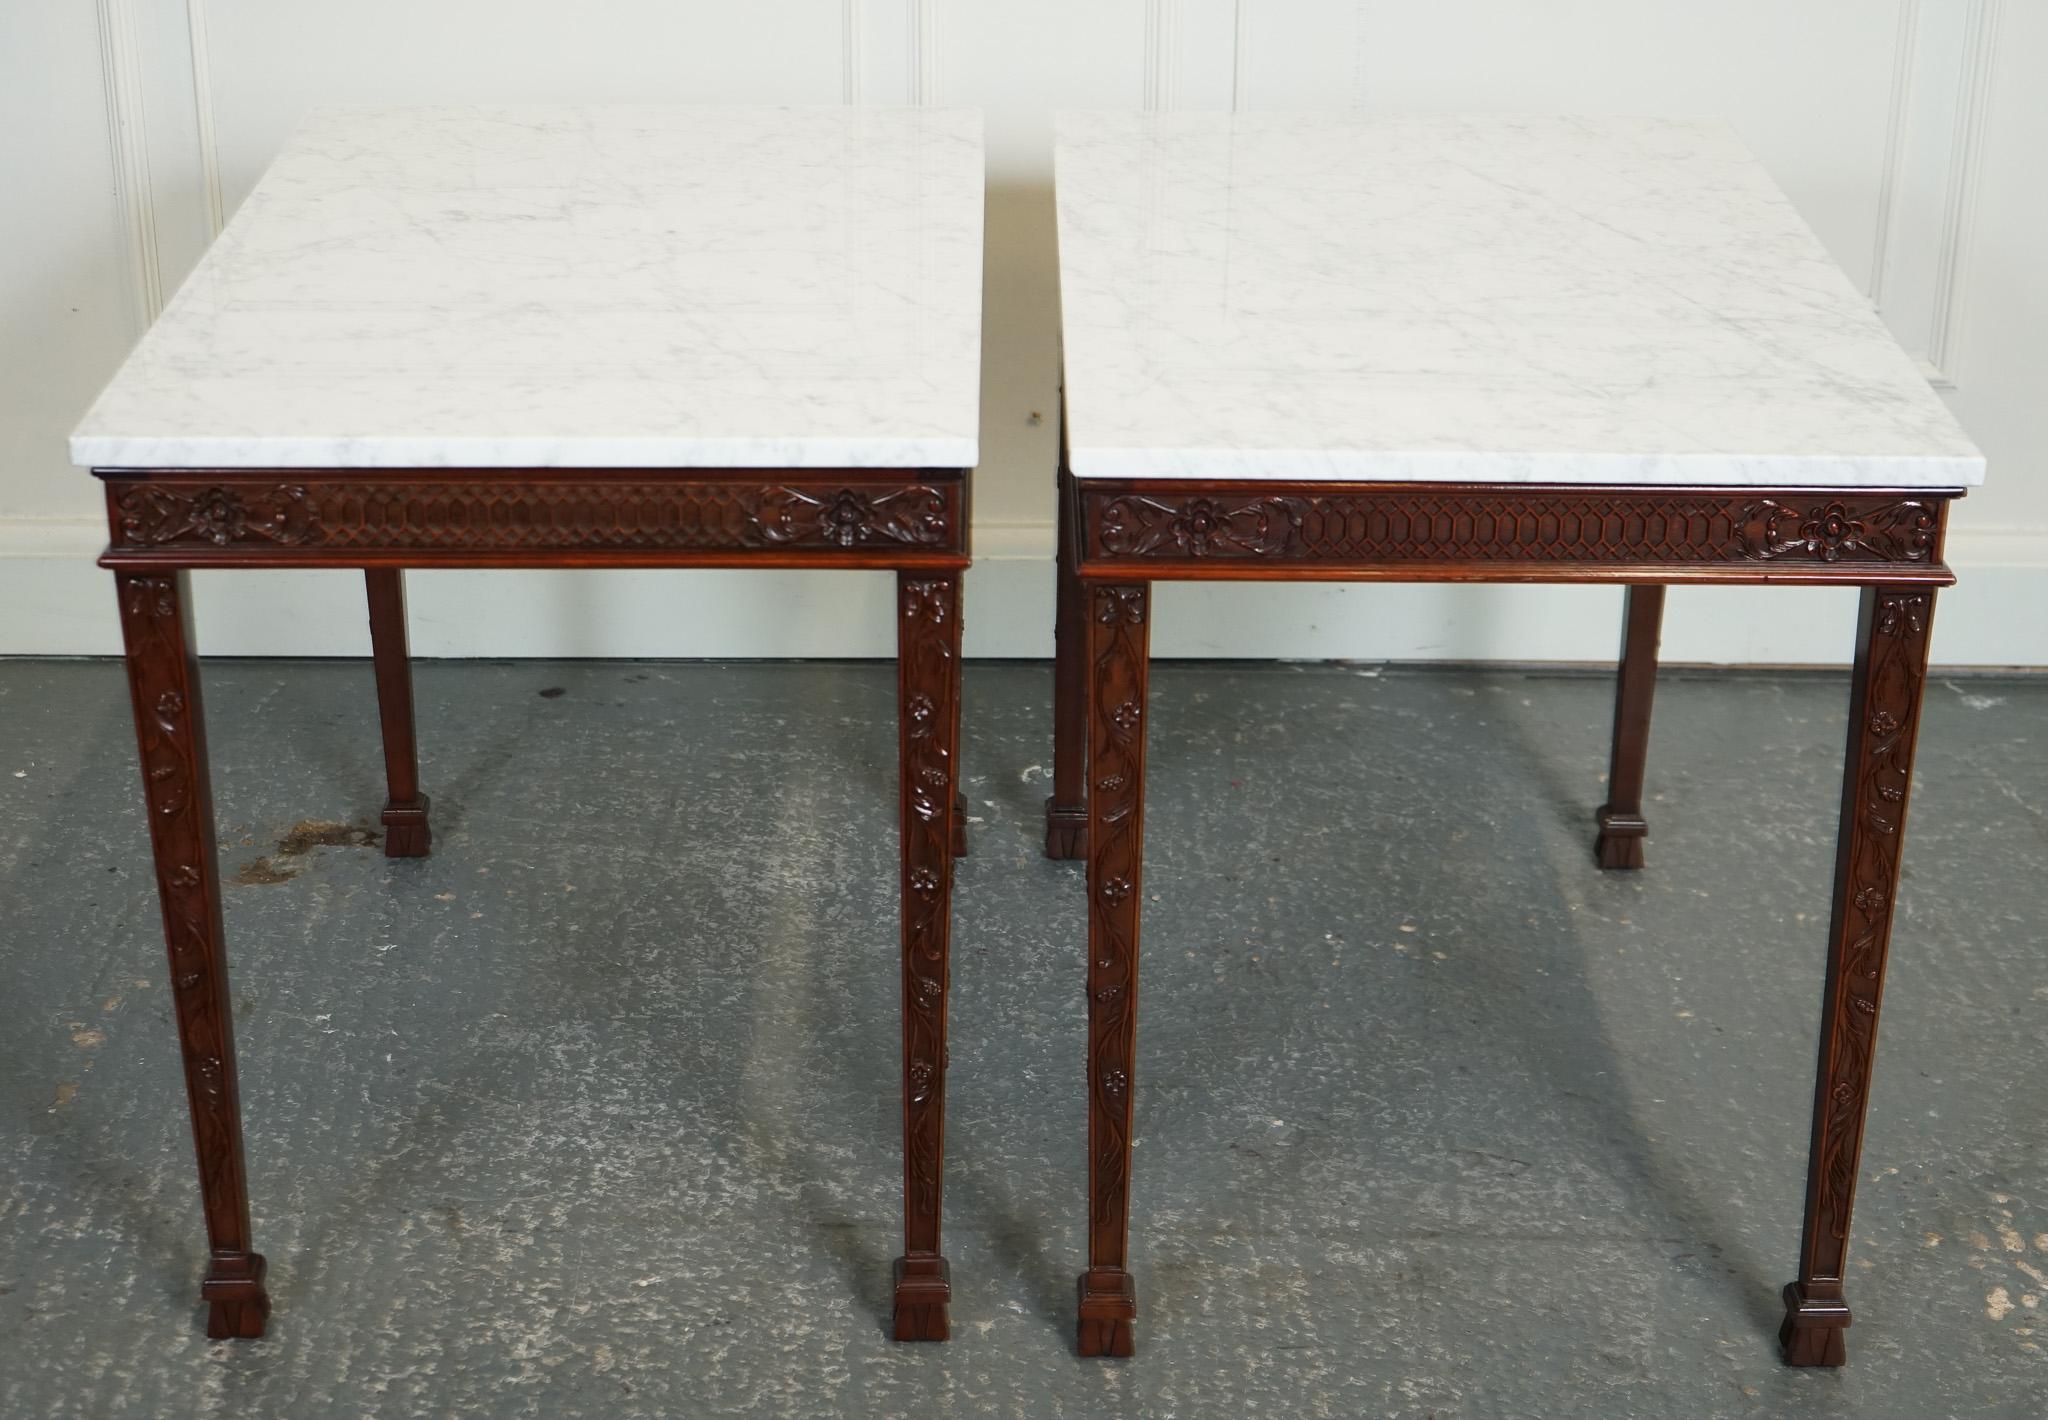 PAiR OF CHIPPENDALE STYLE CONSOLE TABLES WITH NEW WHITE CARRARA MARBLE TOPS For Sale 2